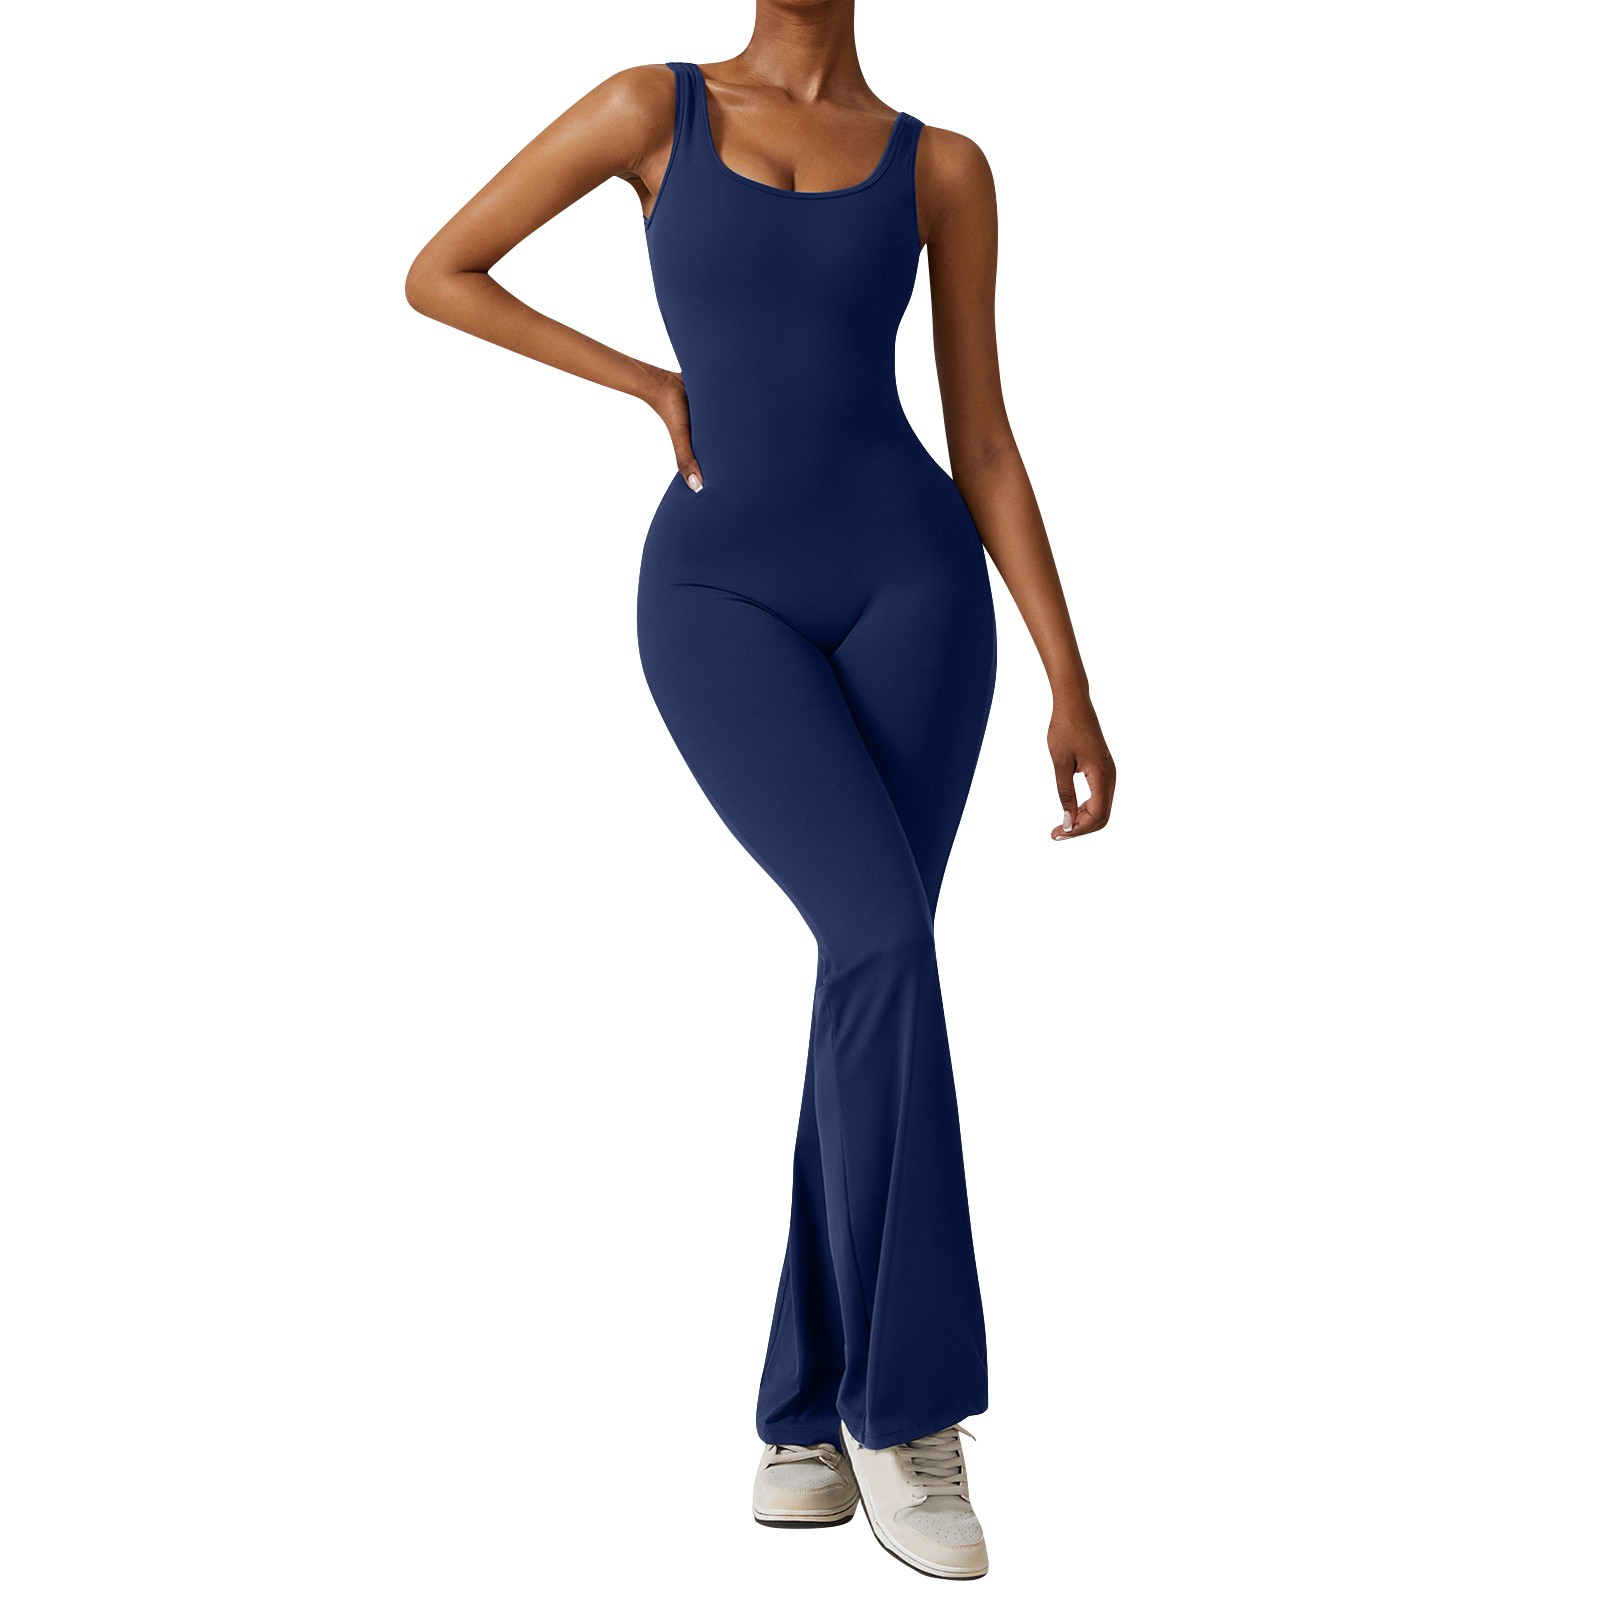 Qcmgmg Womens One Piece Jumpsuit Sleeveless Flare Bodycon Backless ...